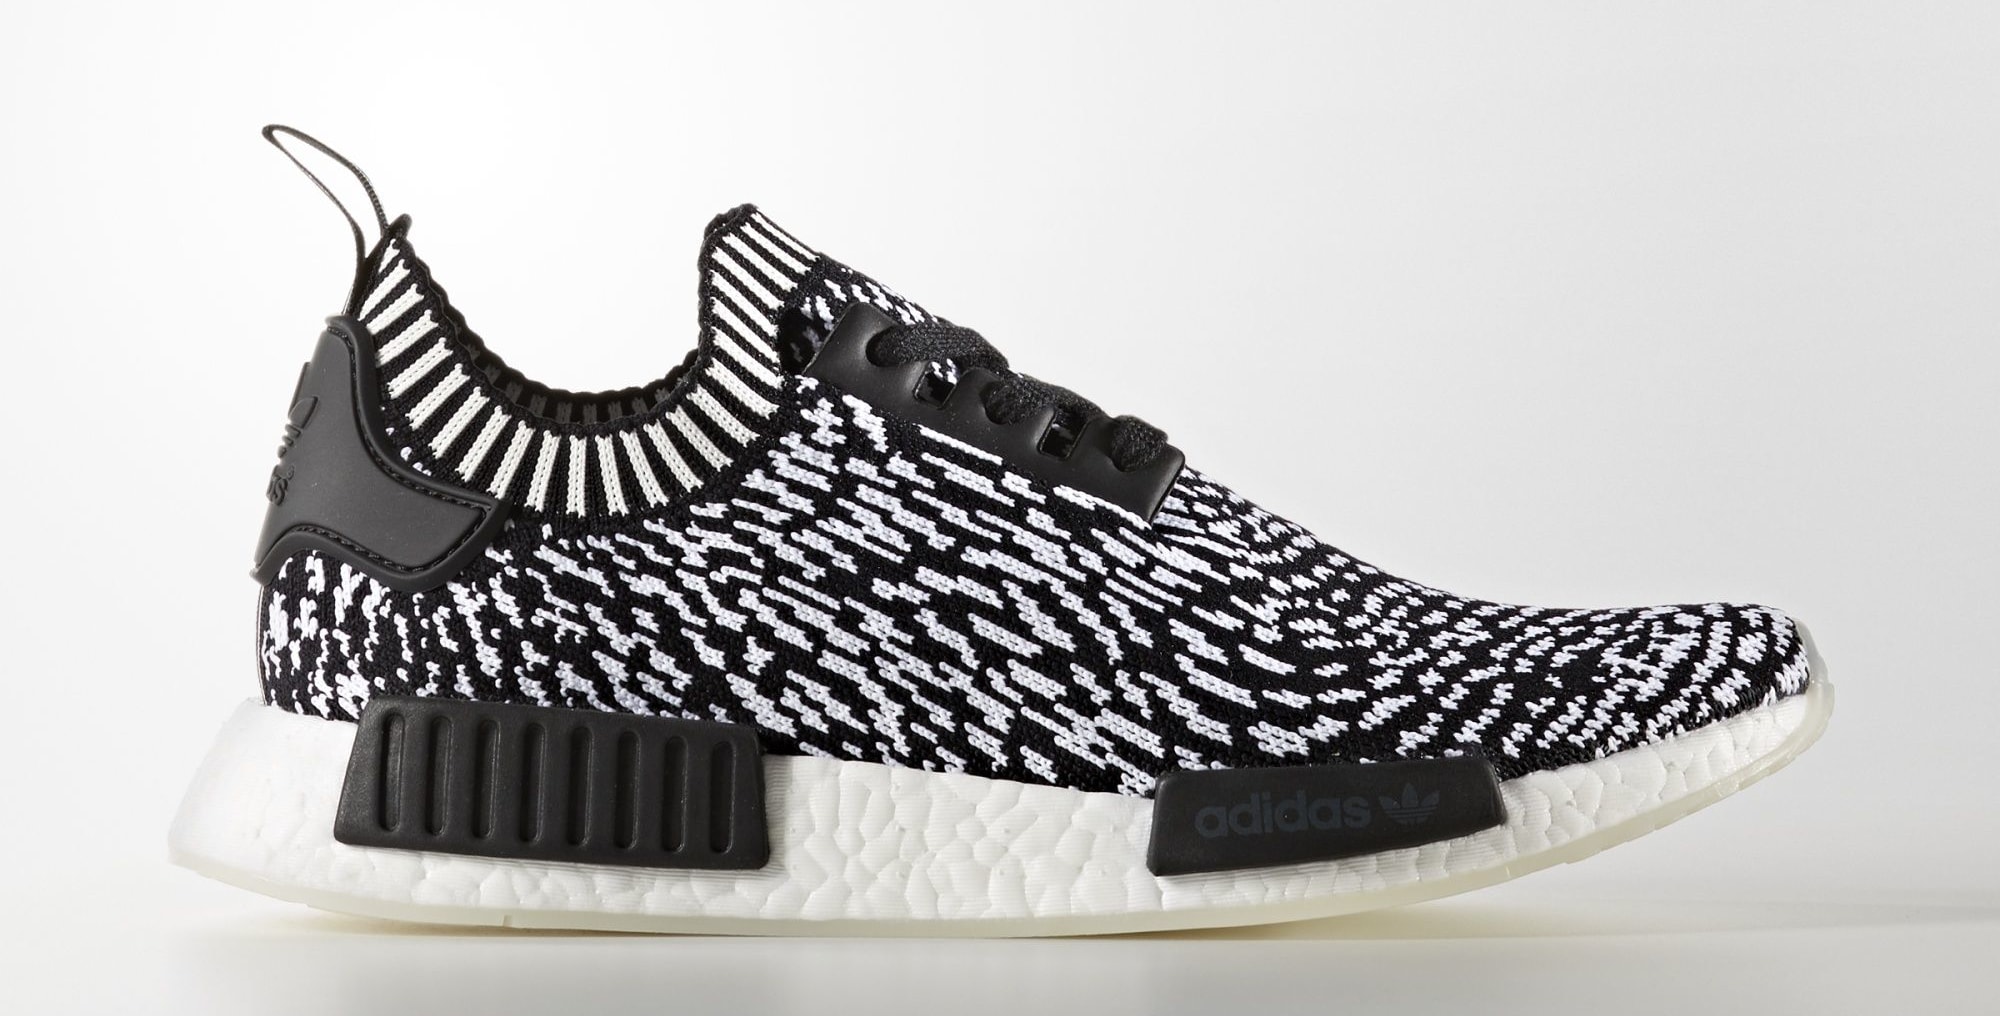 Adidas NMD_R1 NMD City 2 'Sashiko' Pack Release Date BZ0219 BY3013 BY3012 | Sole